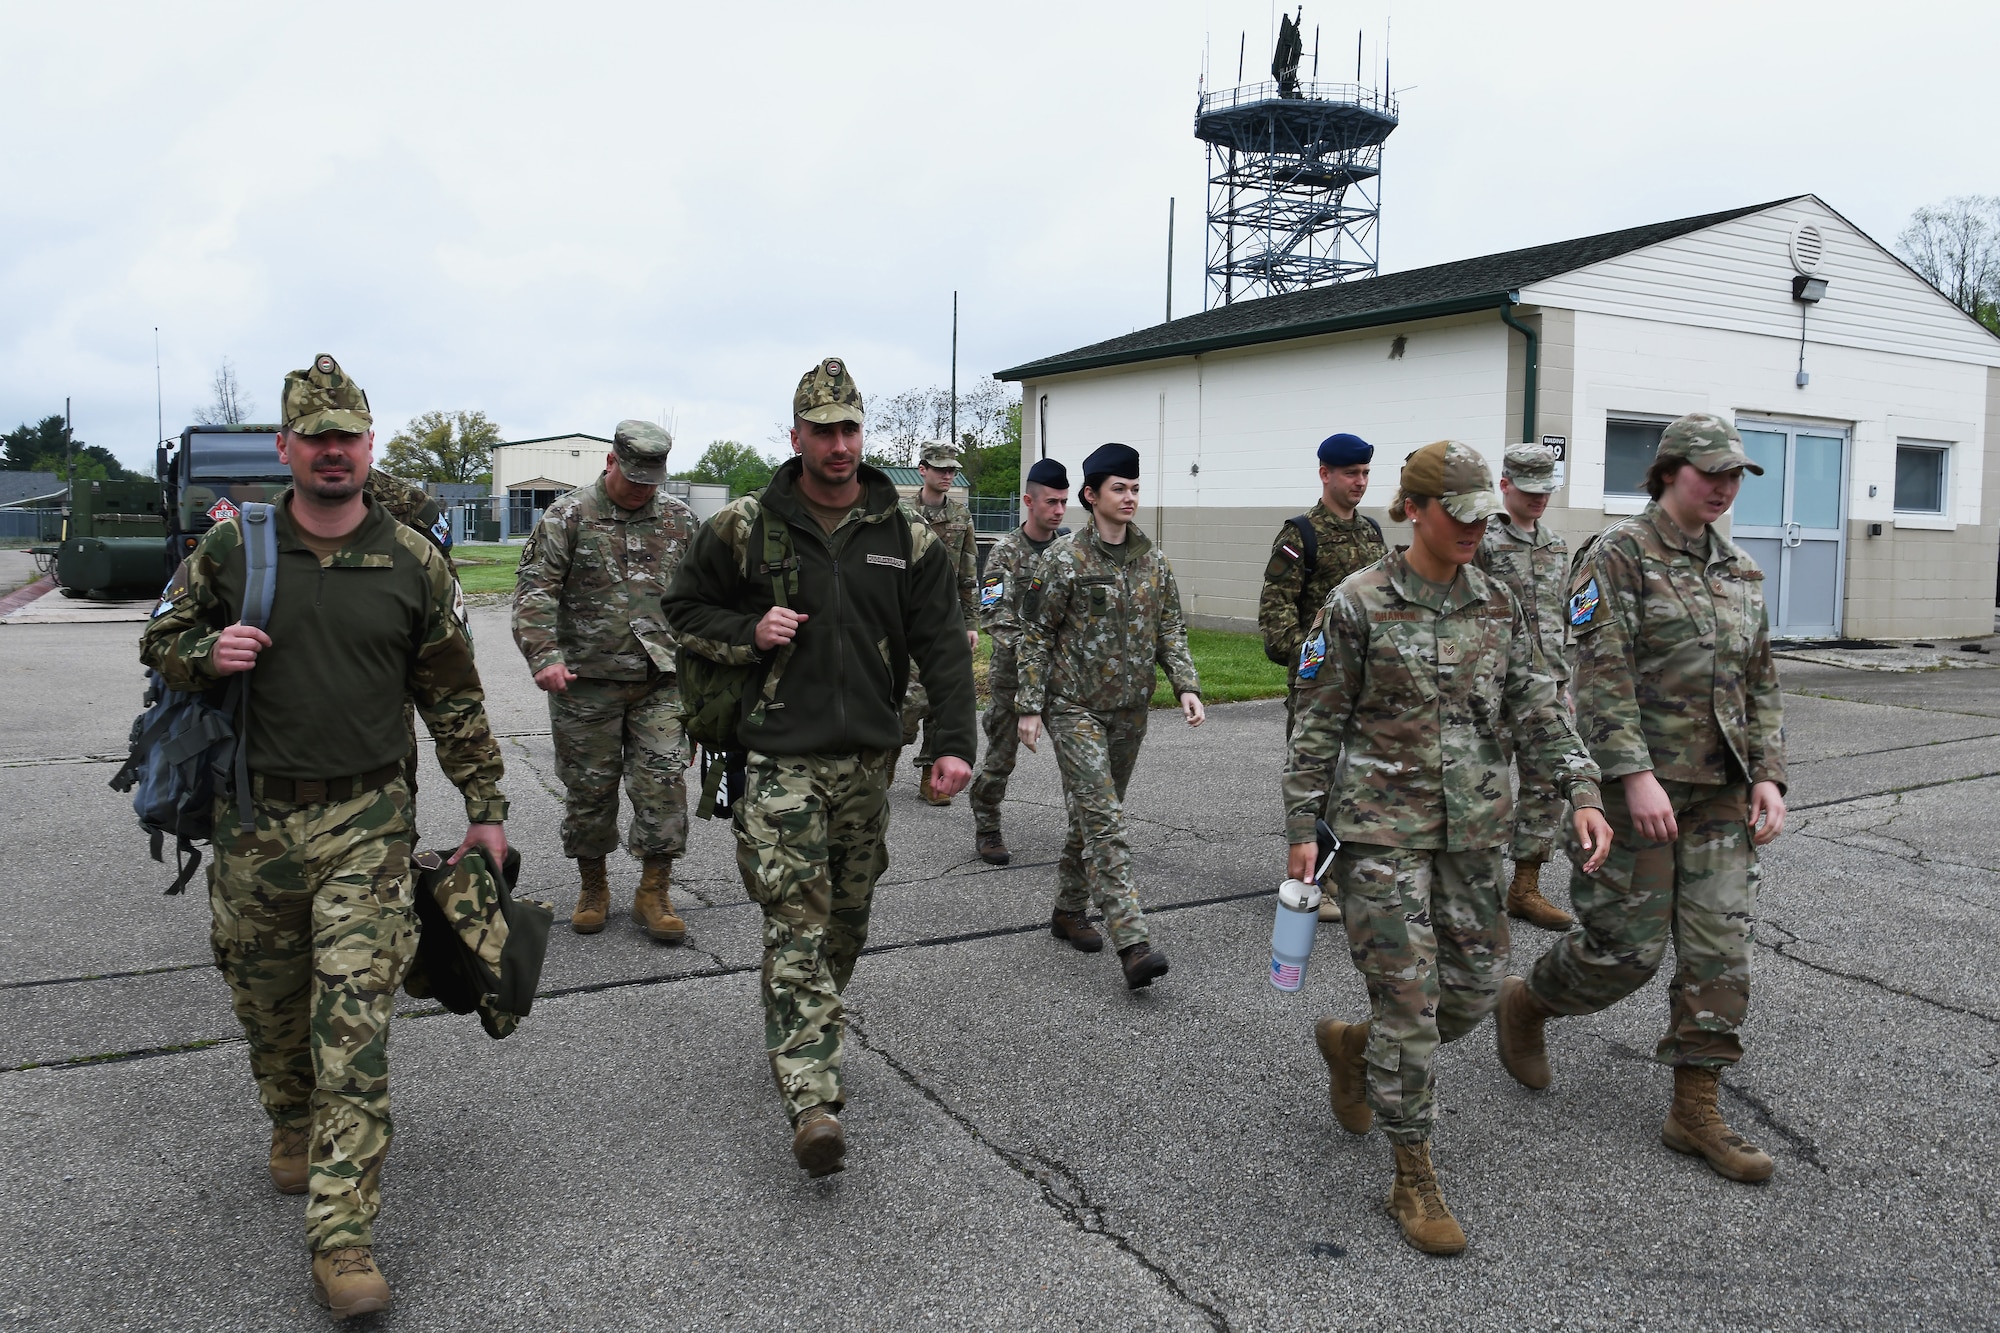 Airmen assigned to the 123rd Air Control Squadron and six service members from Lithuania, Latvia and Hungary walk to a debrief meeting after a training exercise, which included air battle management, ground control intercept, large-force employment and air-to-air combat beyond visual range, on April 28, 2023 in Blue Ash, Ohio. Joint training exercises with international allies and partners increases military readiness and the ability to respond to rapidly changing threats in complex environments. (U.S. Air National Guard photo by Shane Hughes)